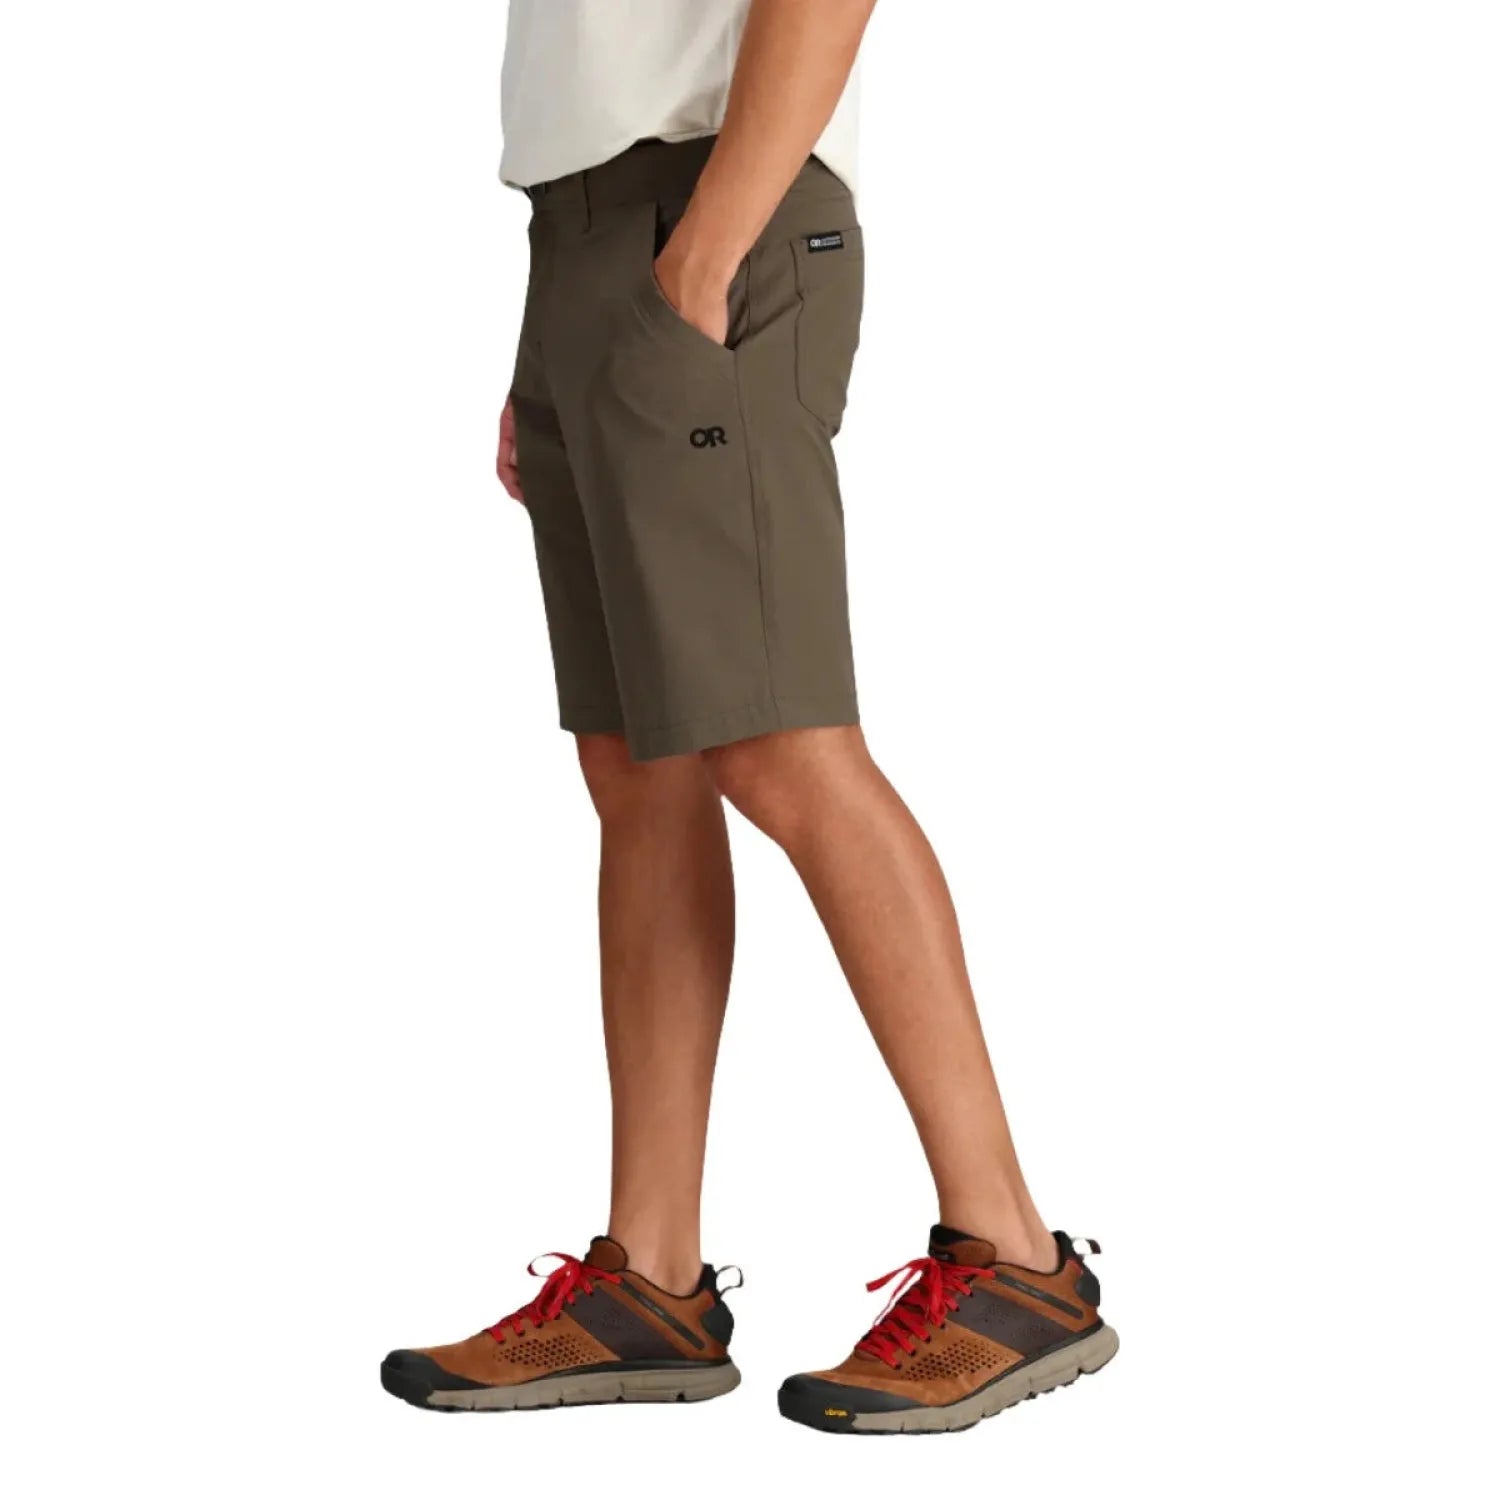 Outdoor Research Men's Ferrosi Shorts - 10" Inseam shown in the Morel color option. Side view on model.